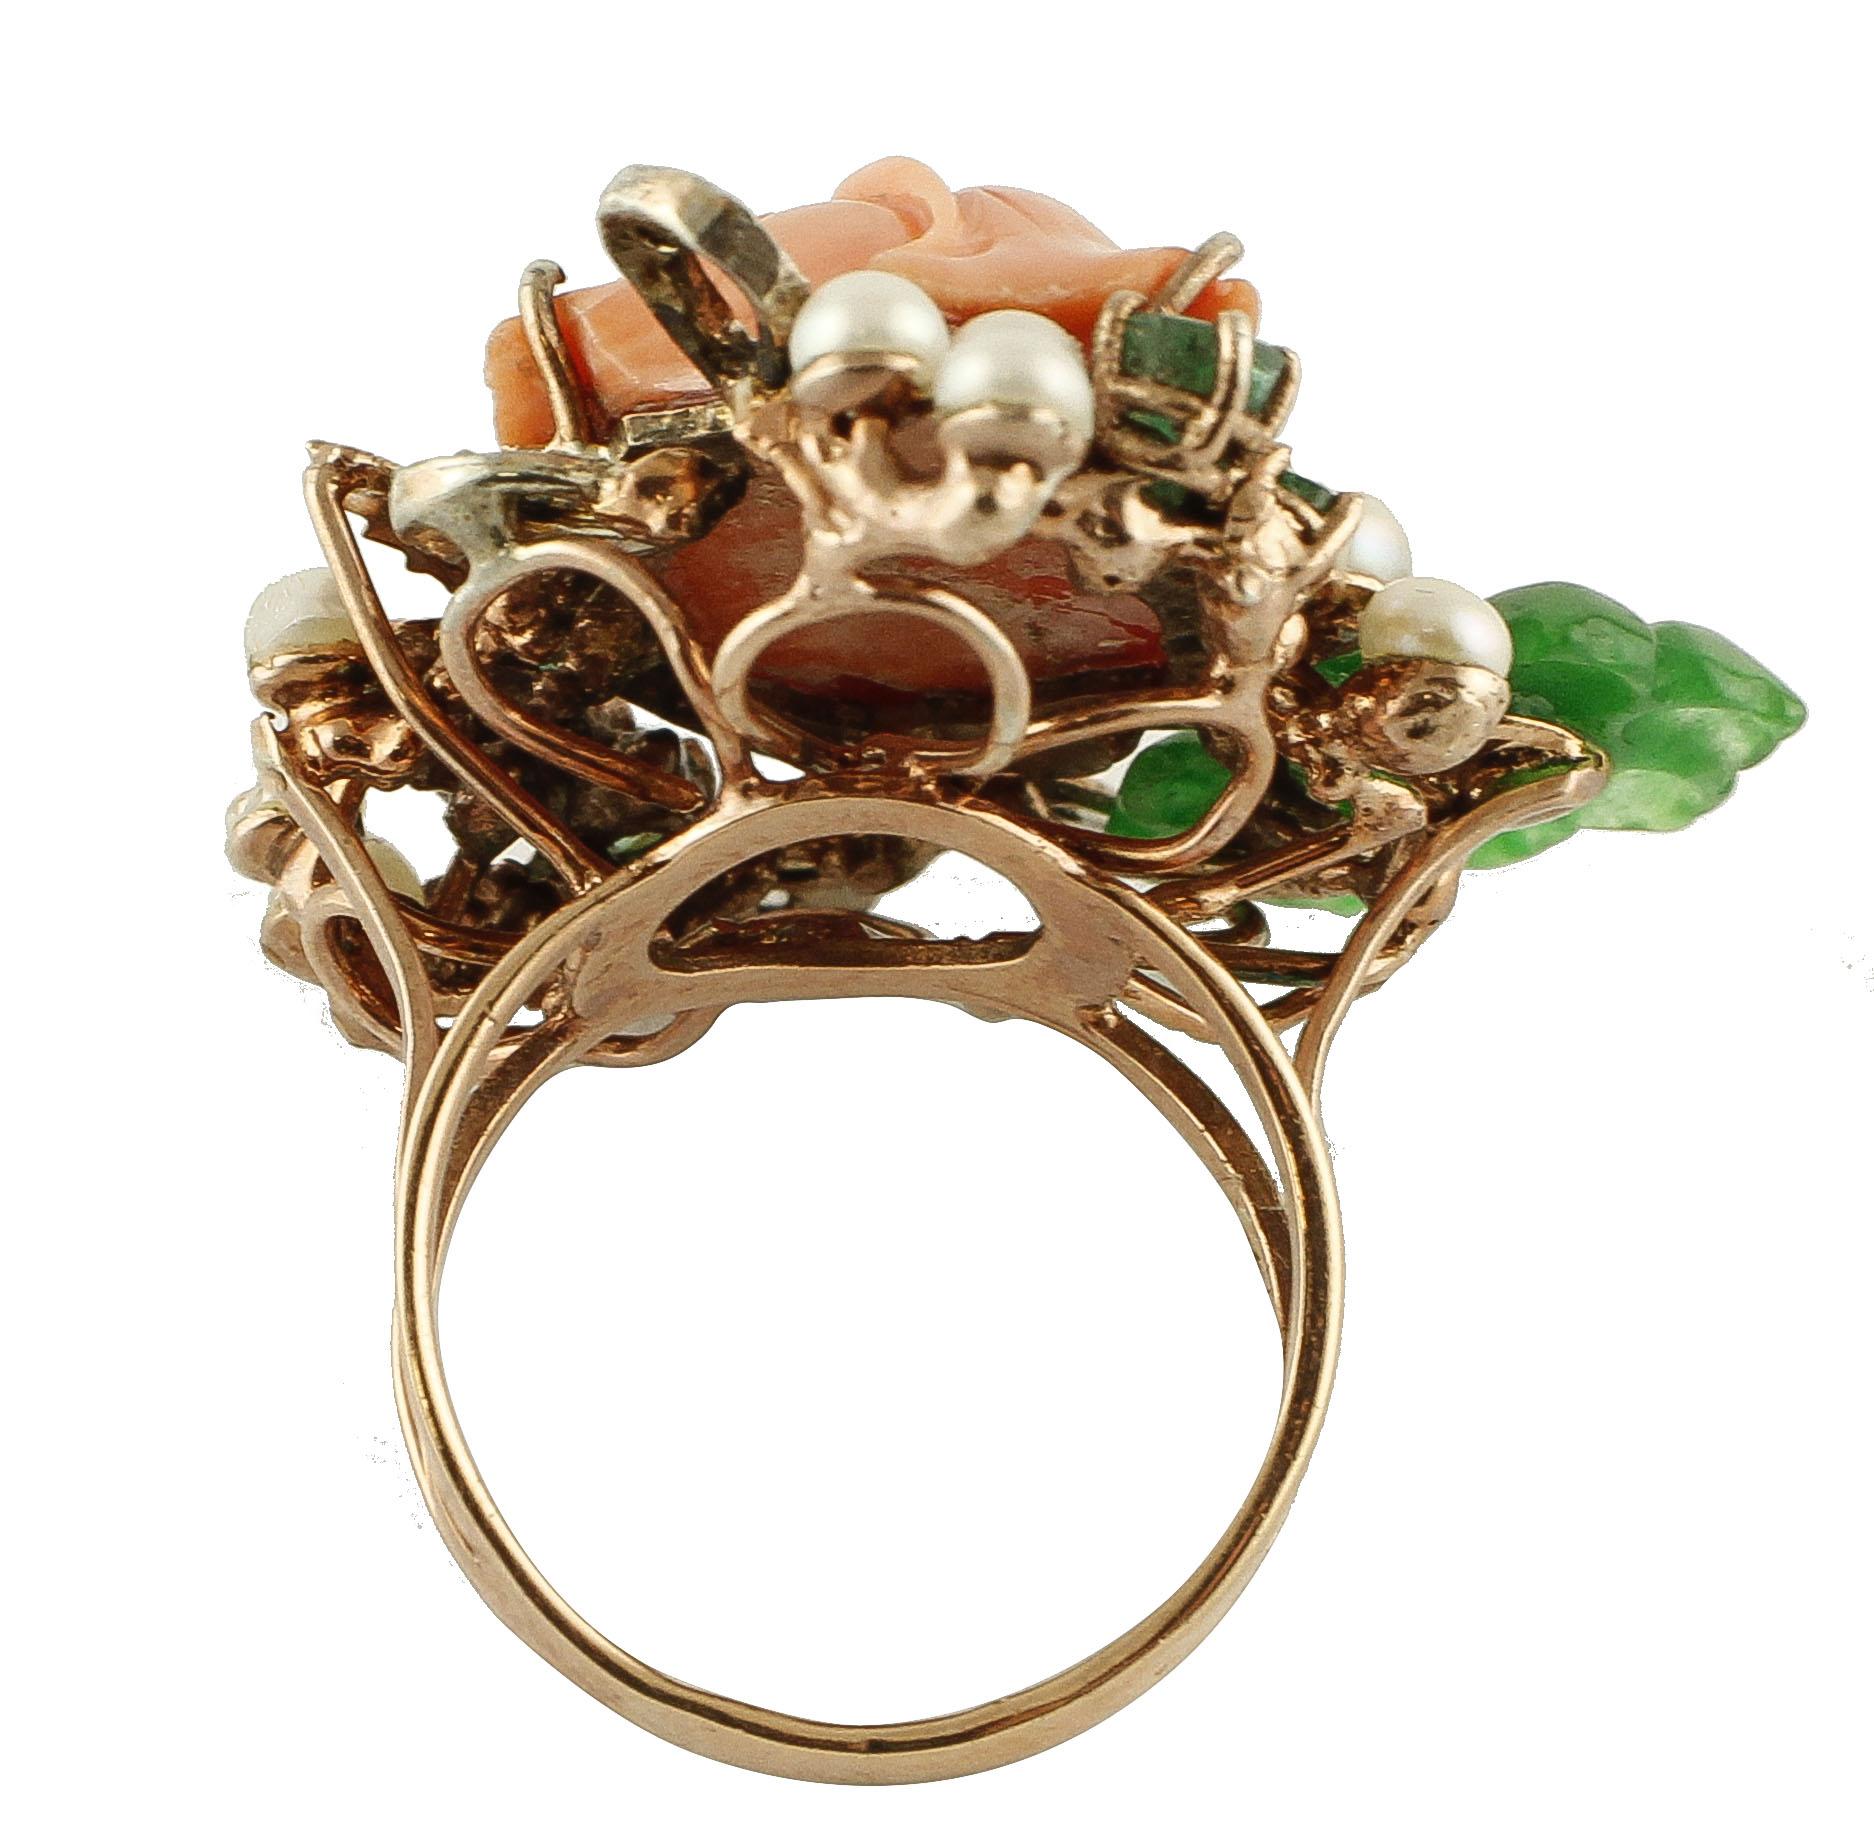 Rose Cut Diamonds Coral Emeralds Green Agate Flowers Little White Pearls Fashion Ring For Sale